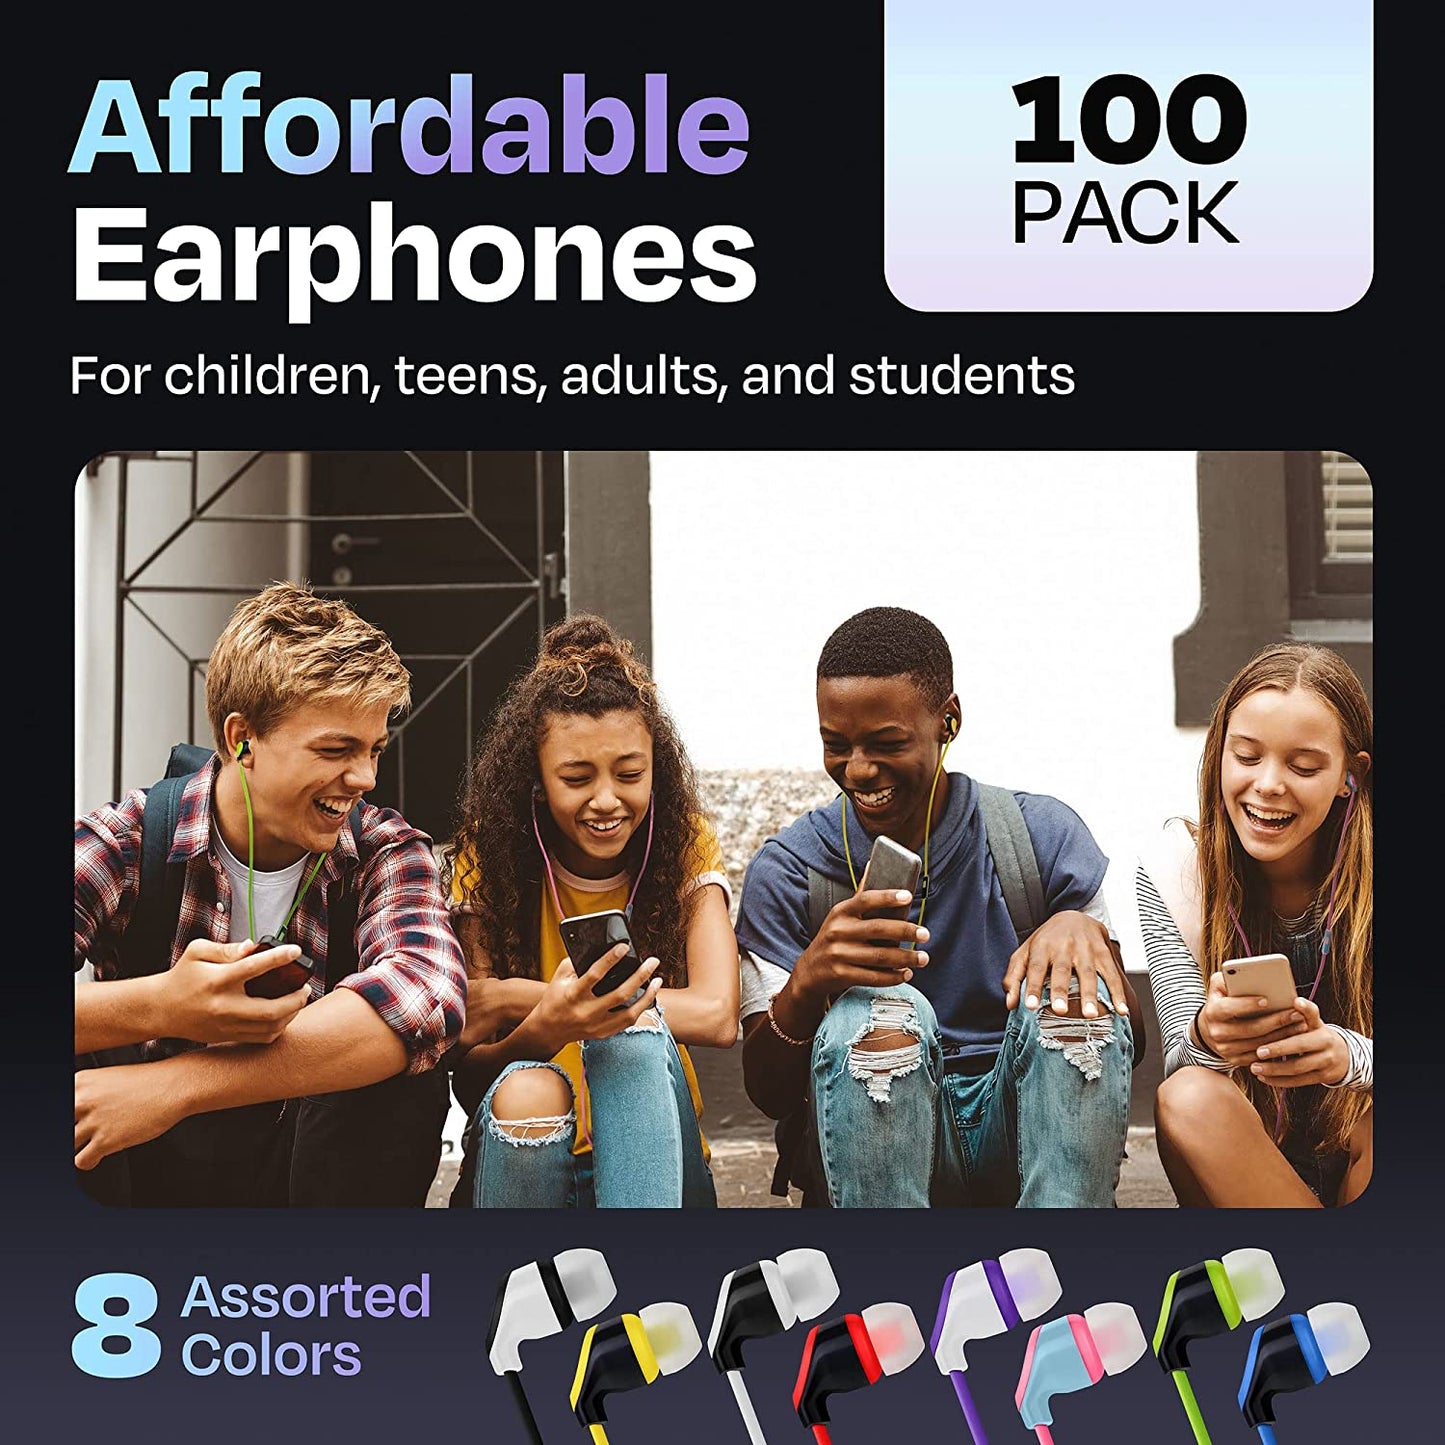 Multipack of 100 Colorful Wired Quality Earbuds (United States)